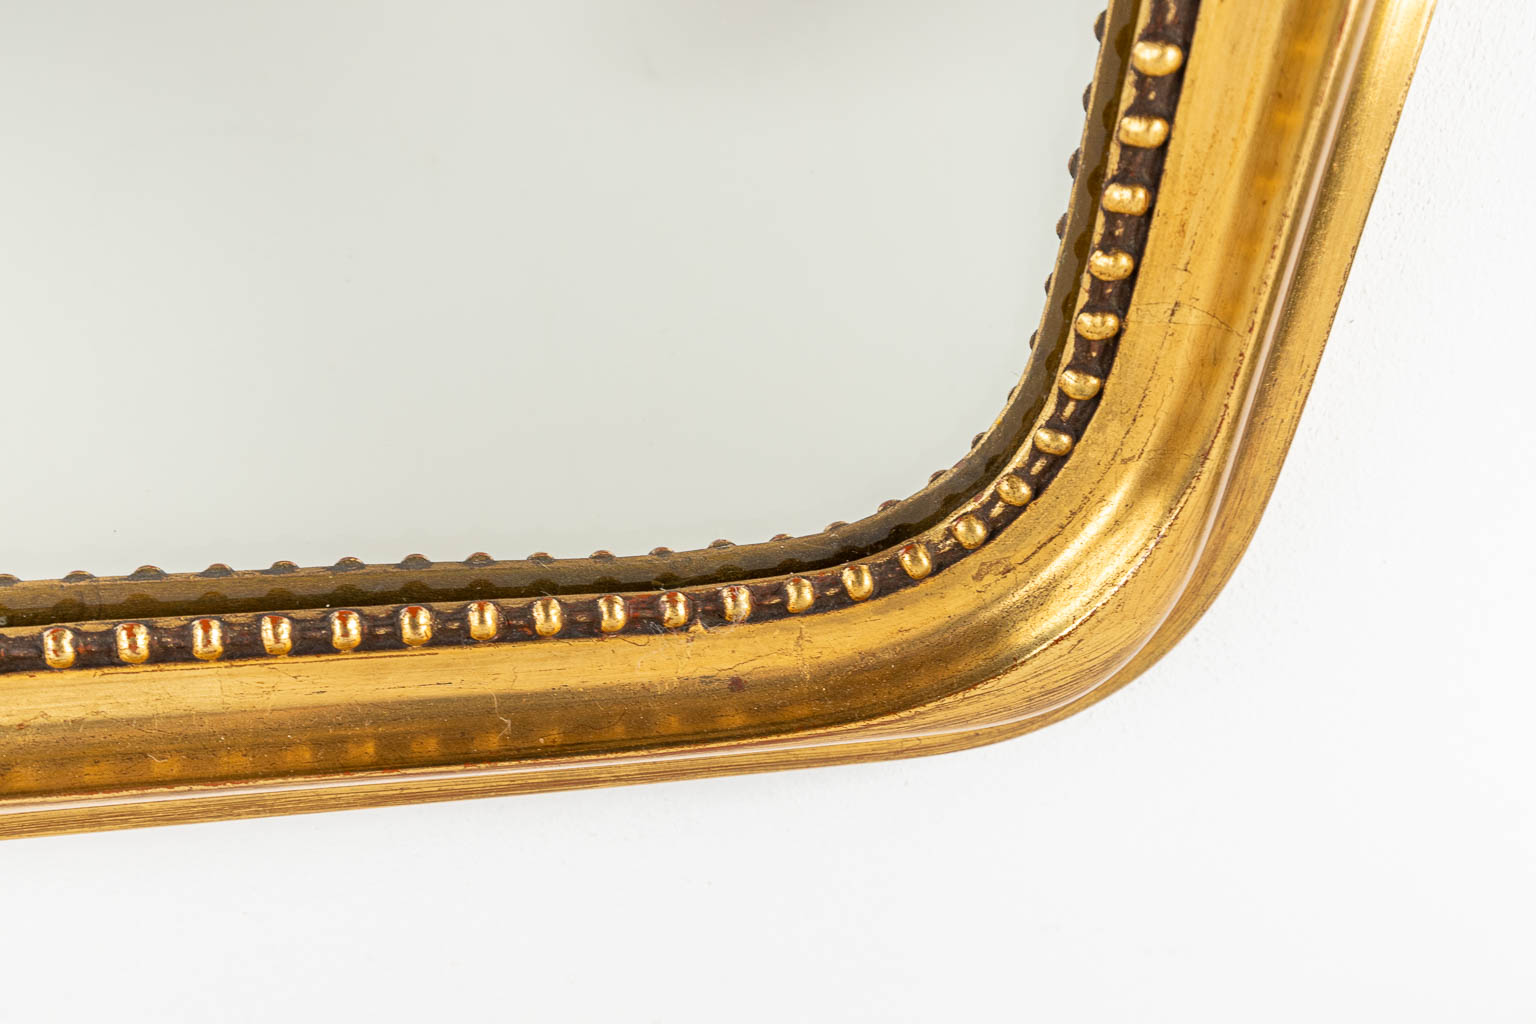 A mirror in Louis XV style, gilt wood and stucco. (H:105cm)